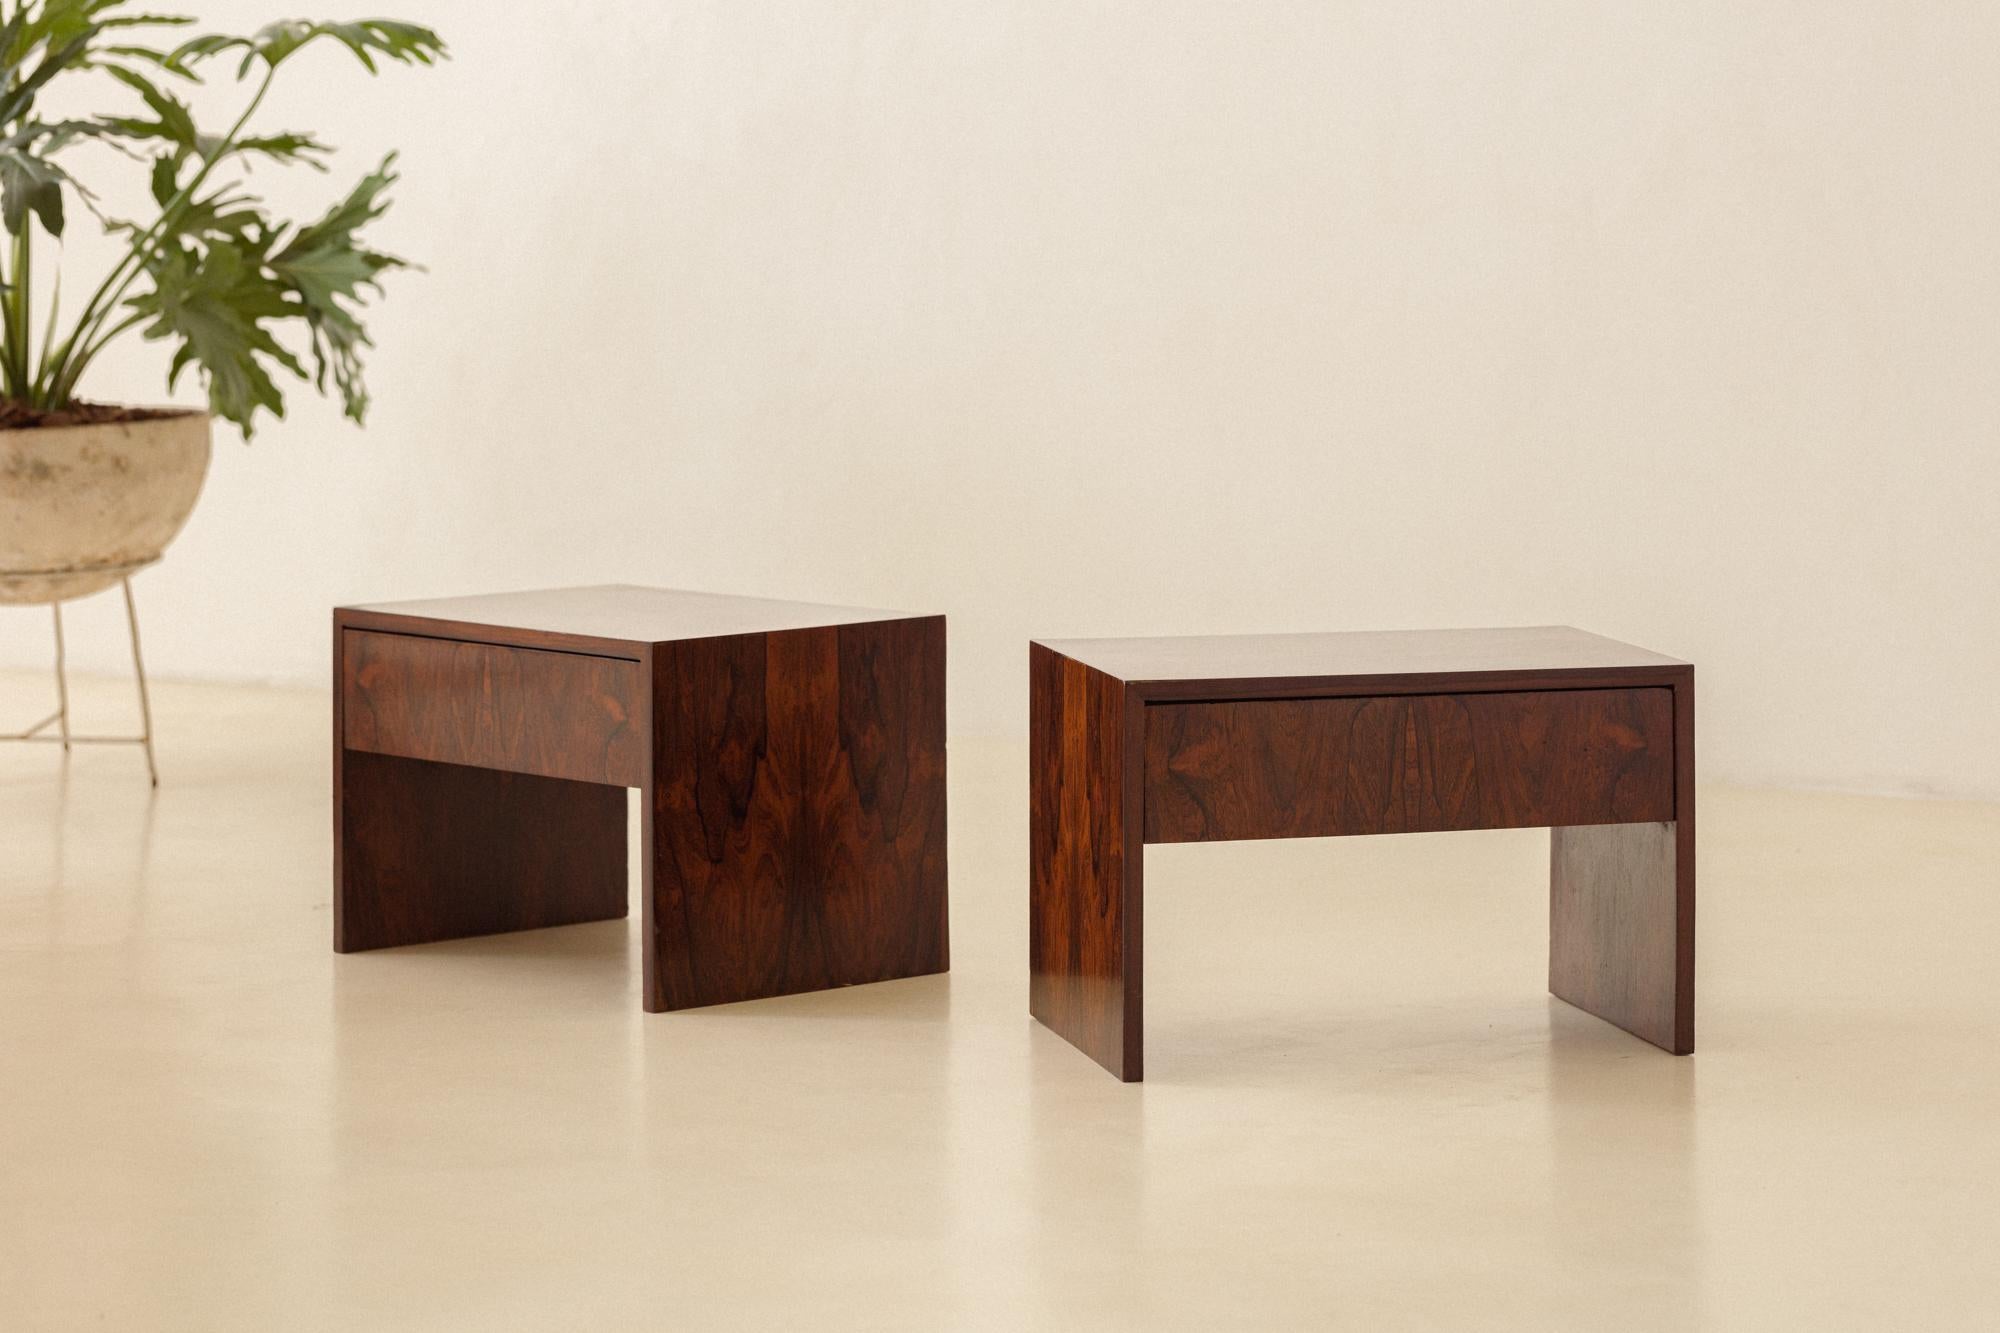 Pair of Rosewood Nightstands by Unknown Designer, 1960s, Brazilian Midcentury For Sale 7